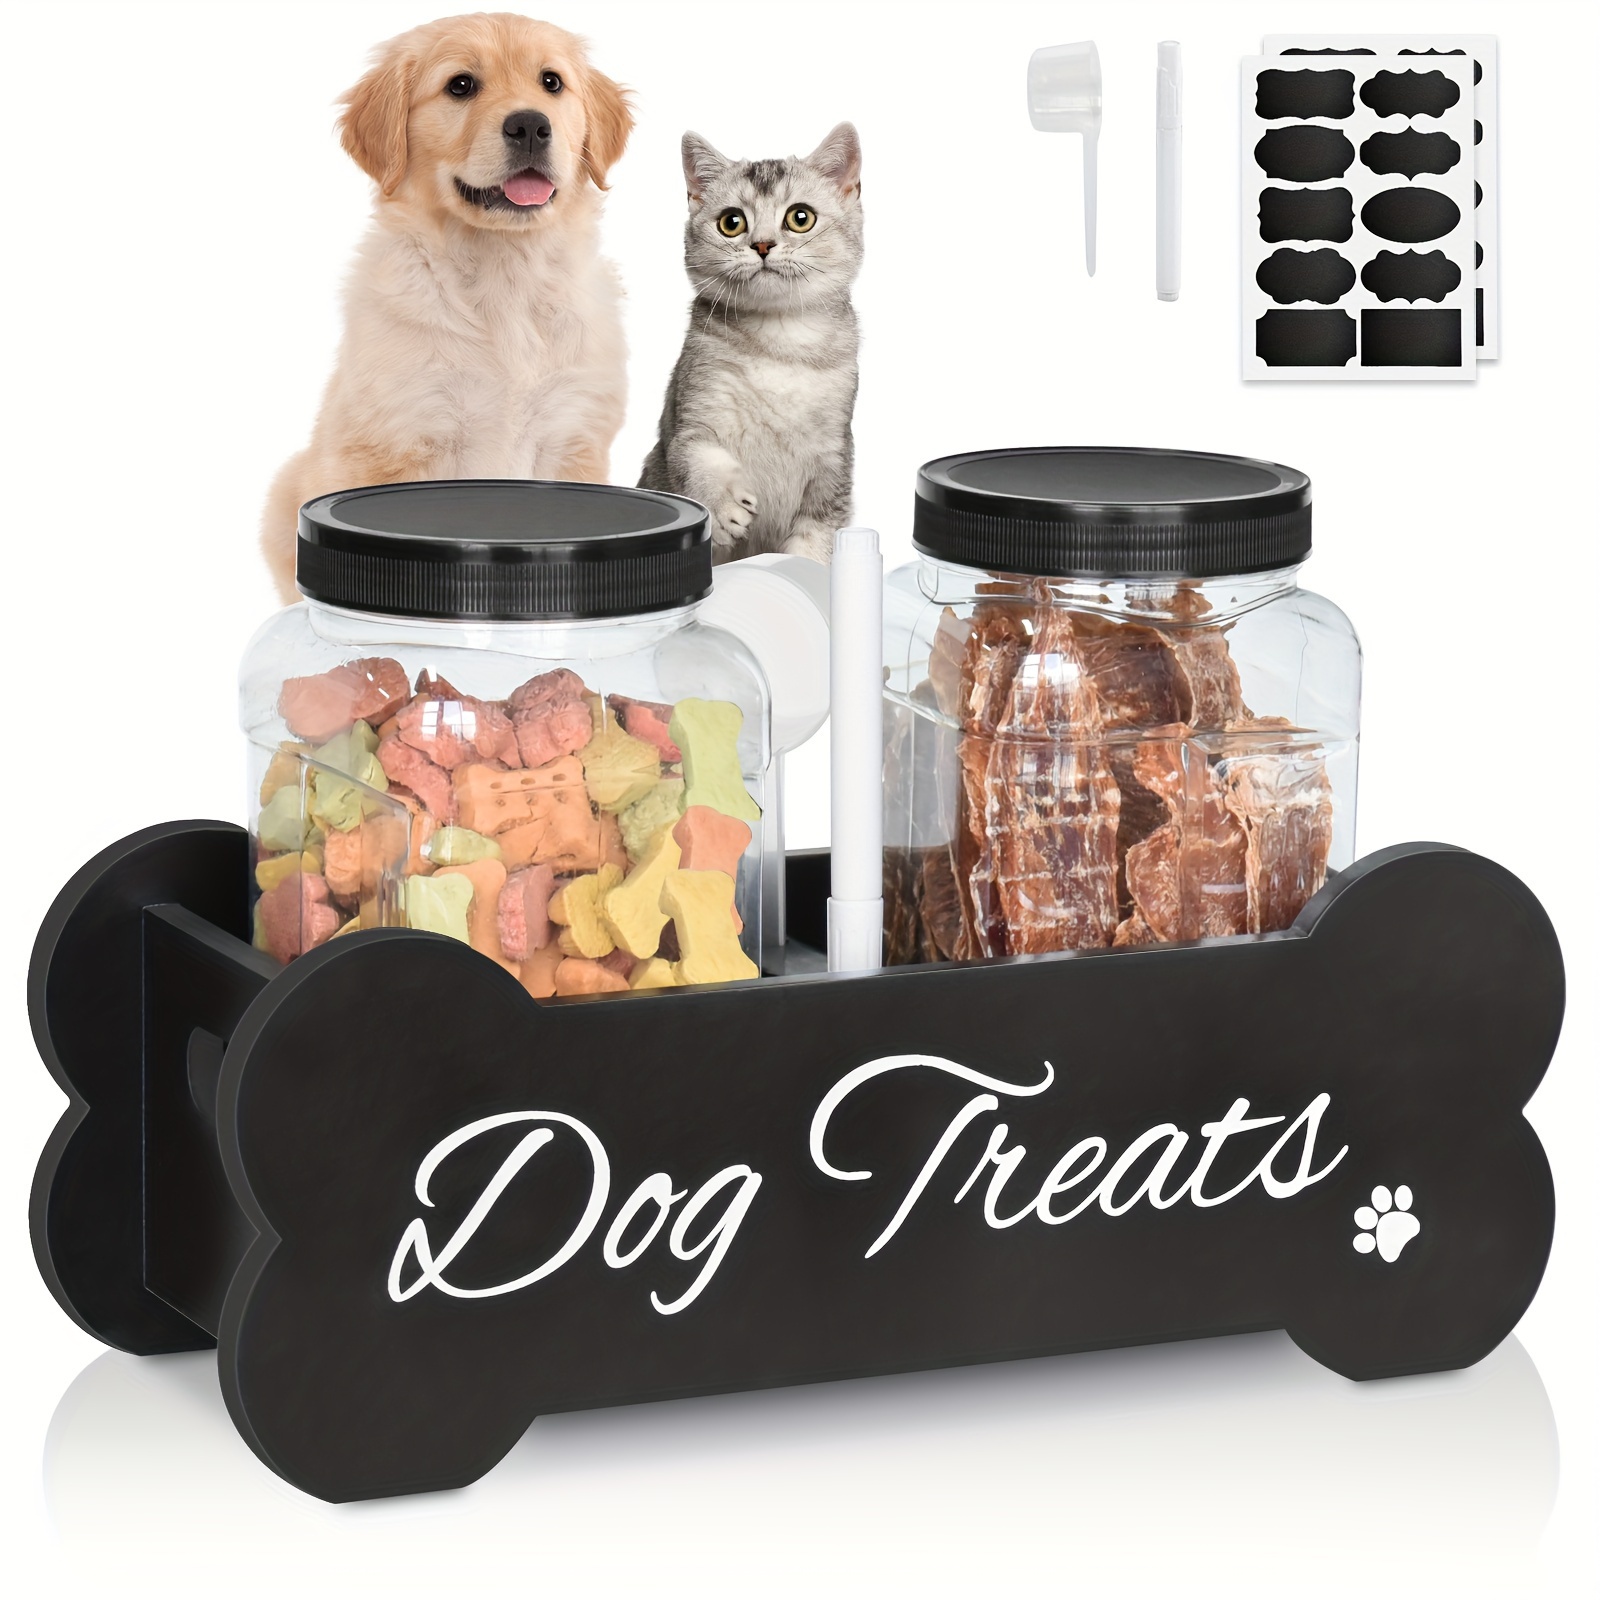 

Black Dog Treat Container, Dog Cat Food Storage Container With 2 Jars, Pet Treat Storage Organizer For Dog & Cat, Dog Food Storage Canister For Kitchen Countertop, Gift For Pet Owner